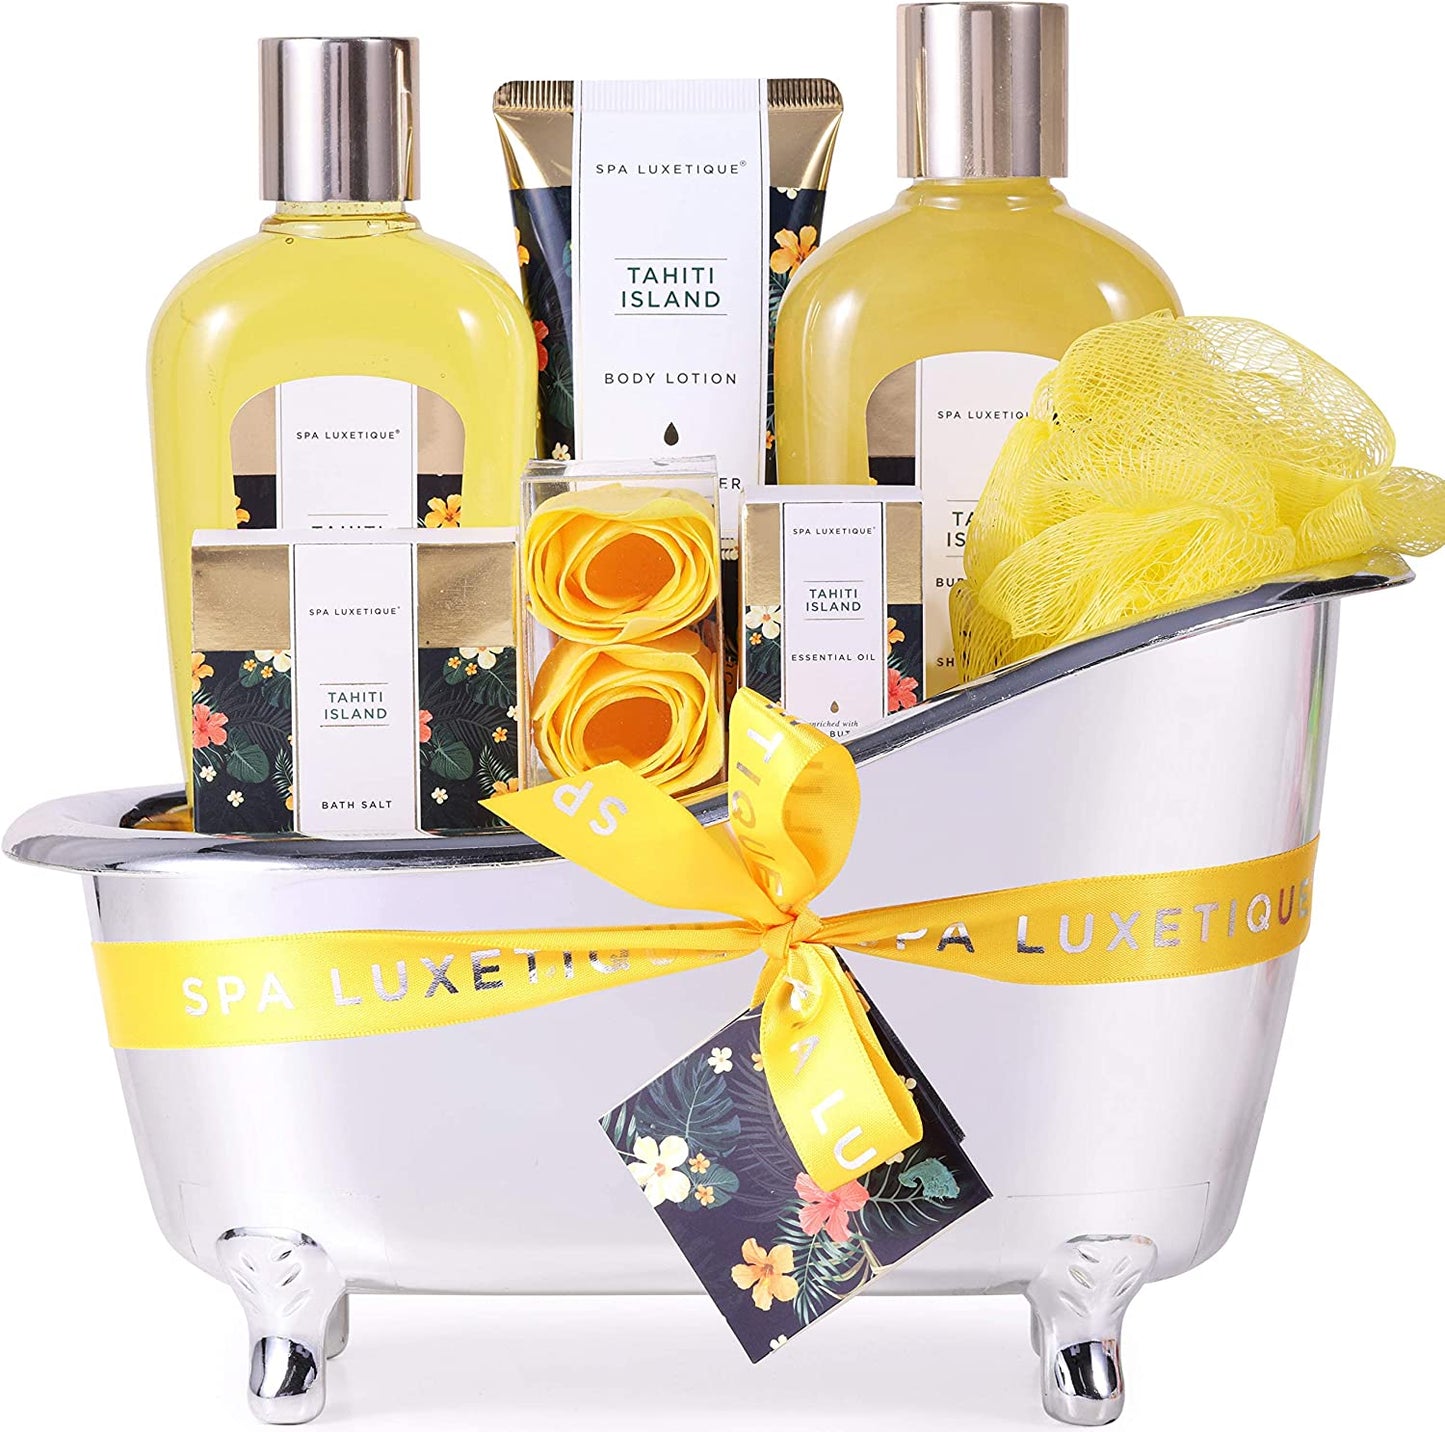 Gift Sets for Women- Spa Gift Set,8Pcs Tahiti Island Bath Sets with Essential Oil,Body Lotion,Bath Bombs,Pamper Gifts for Women,Gifts for Mum,Birthday Gifts for Her, Christmas Gifts